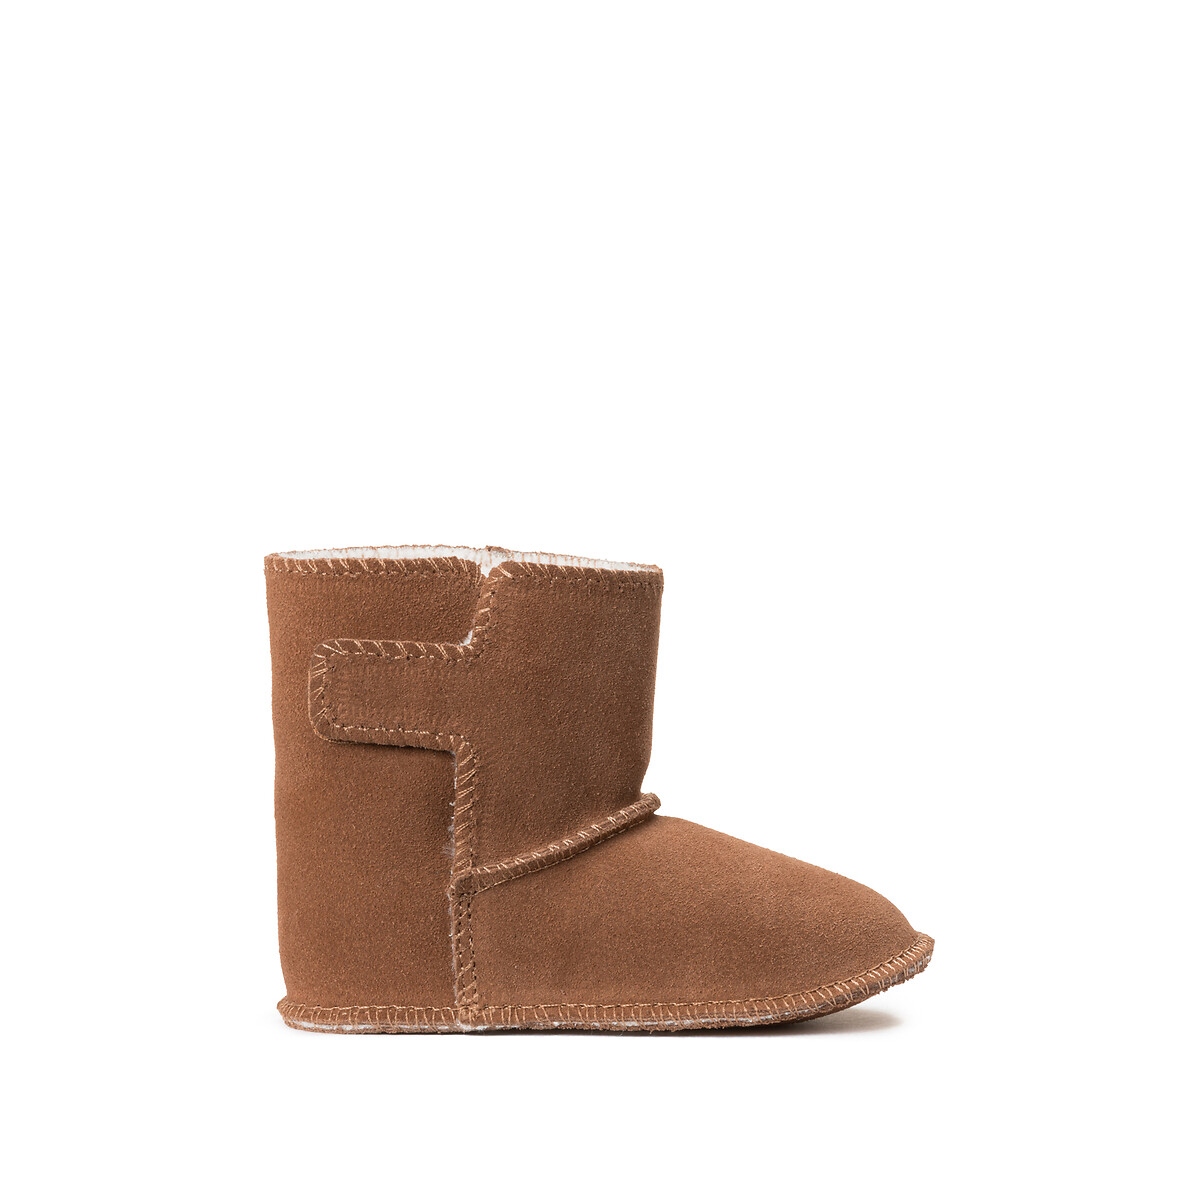 Kids Suede Slipper Boots with Faux Fur Lining and Touch ’n’ Close Fastening